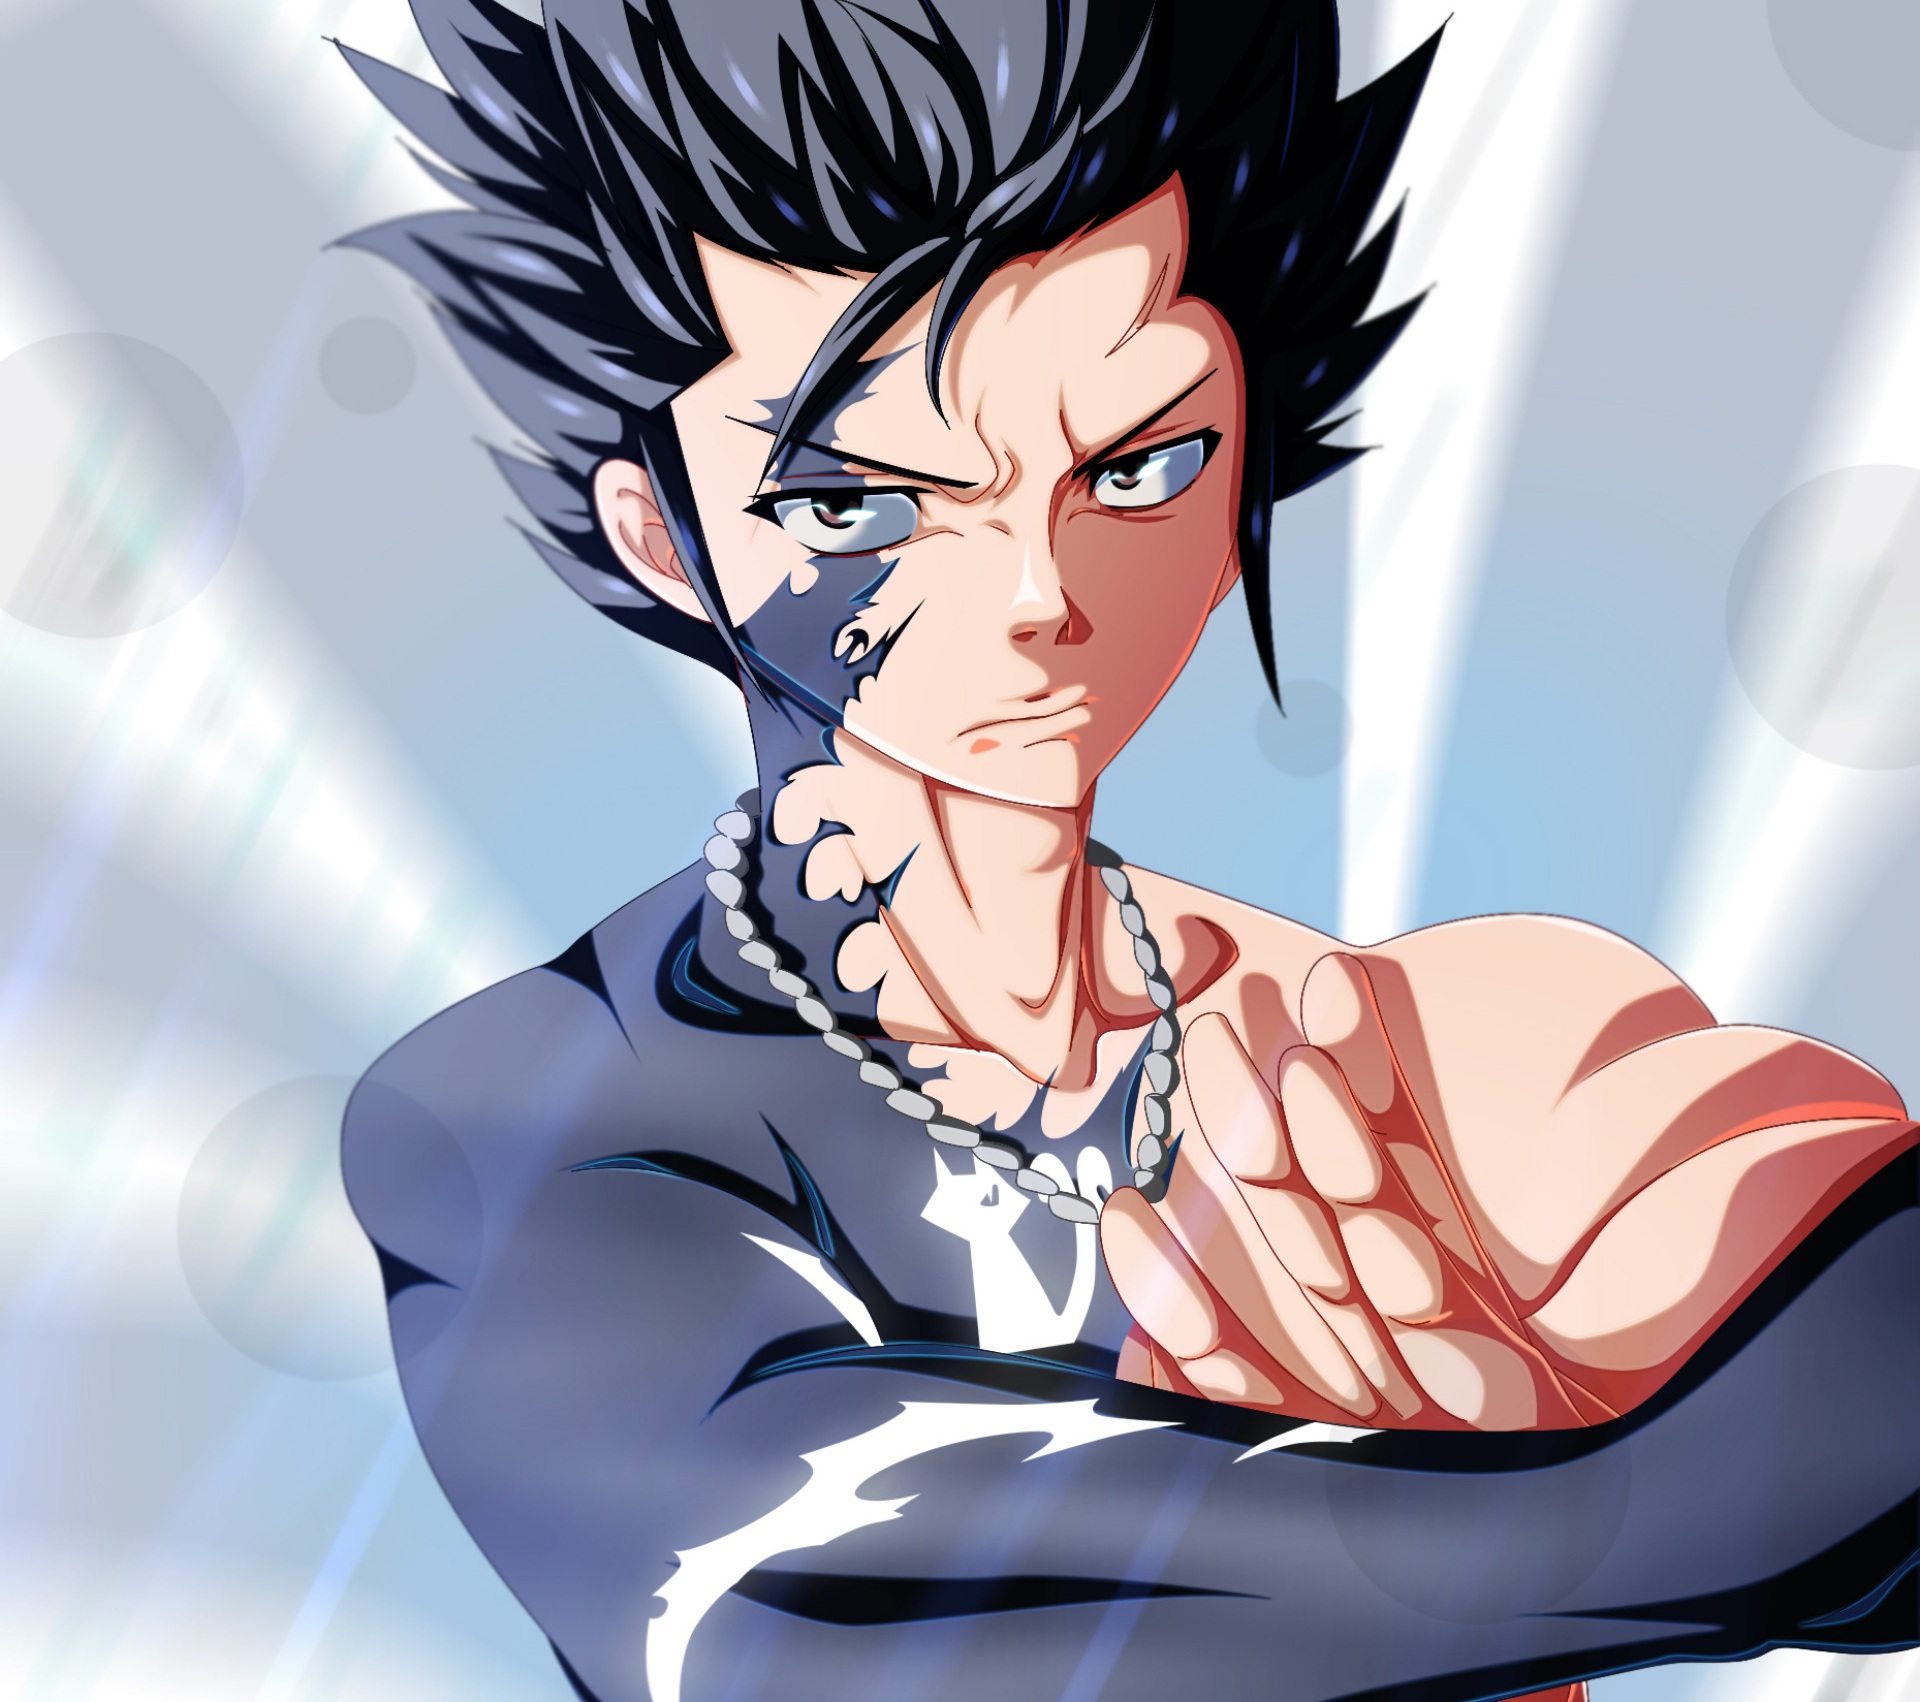 Anime Fairy Tail HD Wallpaper | Background Image